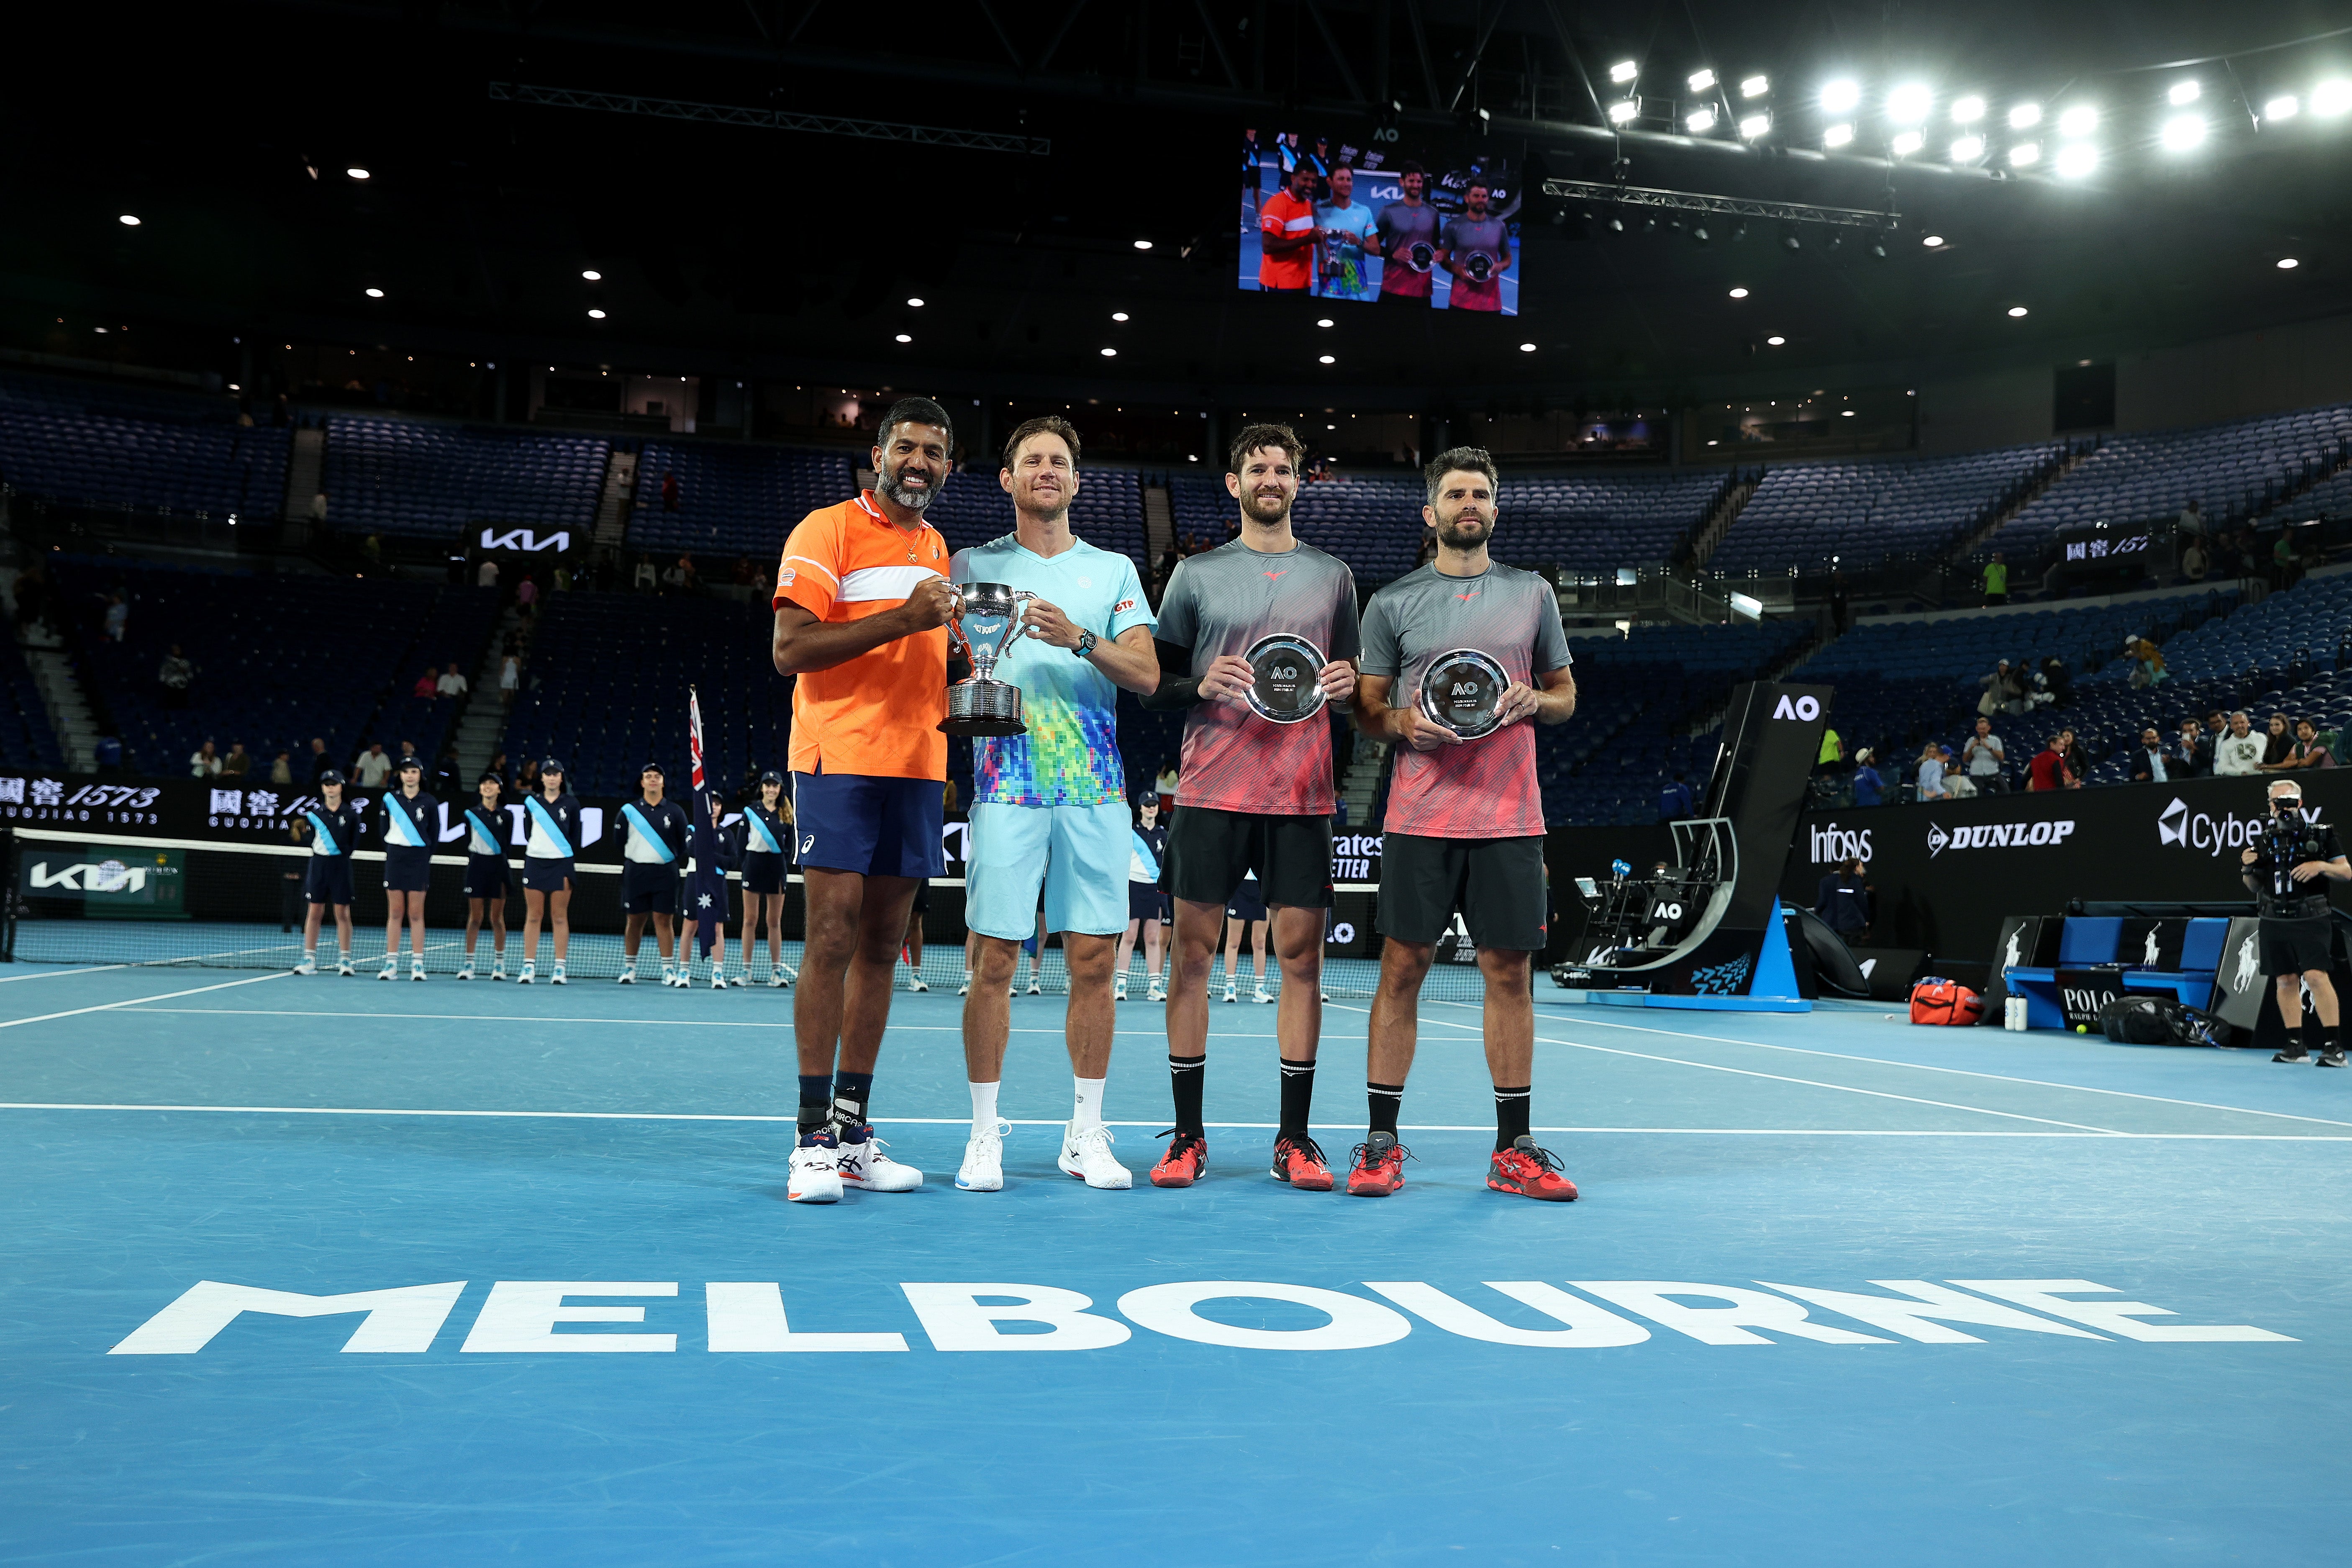 Tennis doubles faces uncertain future after sparse crowds at the Australian Open